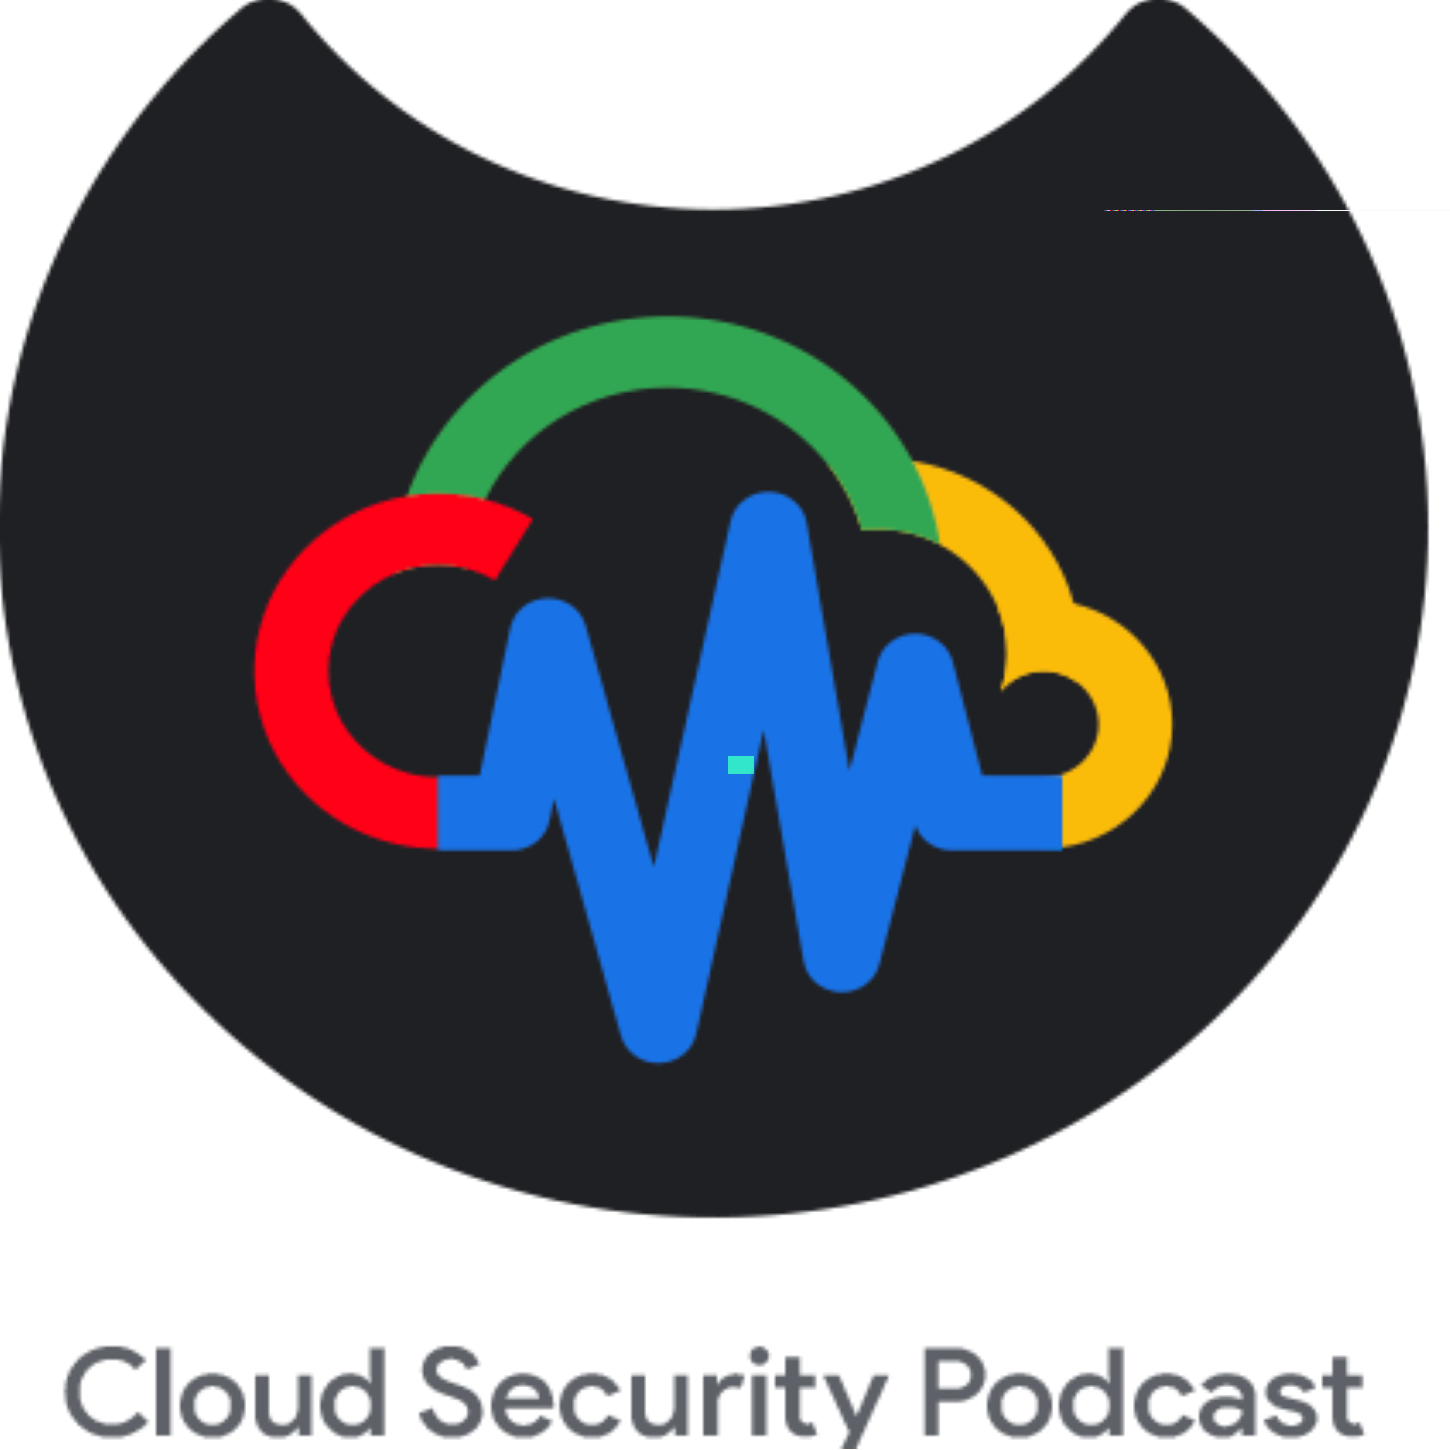 A highlight from EP98 How to Cloud IR or Why Attackers Become Cloud Native Faster?